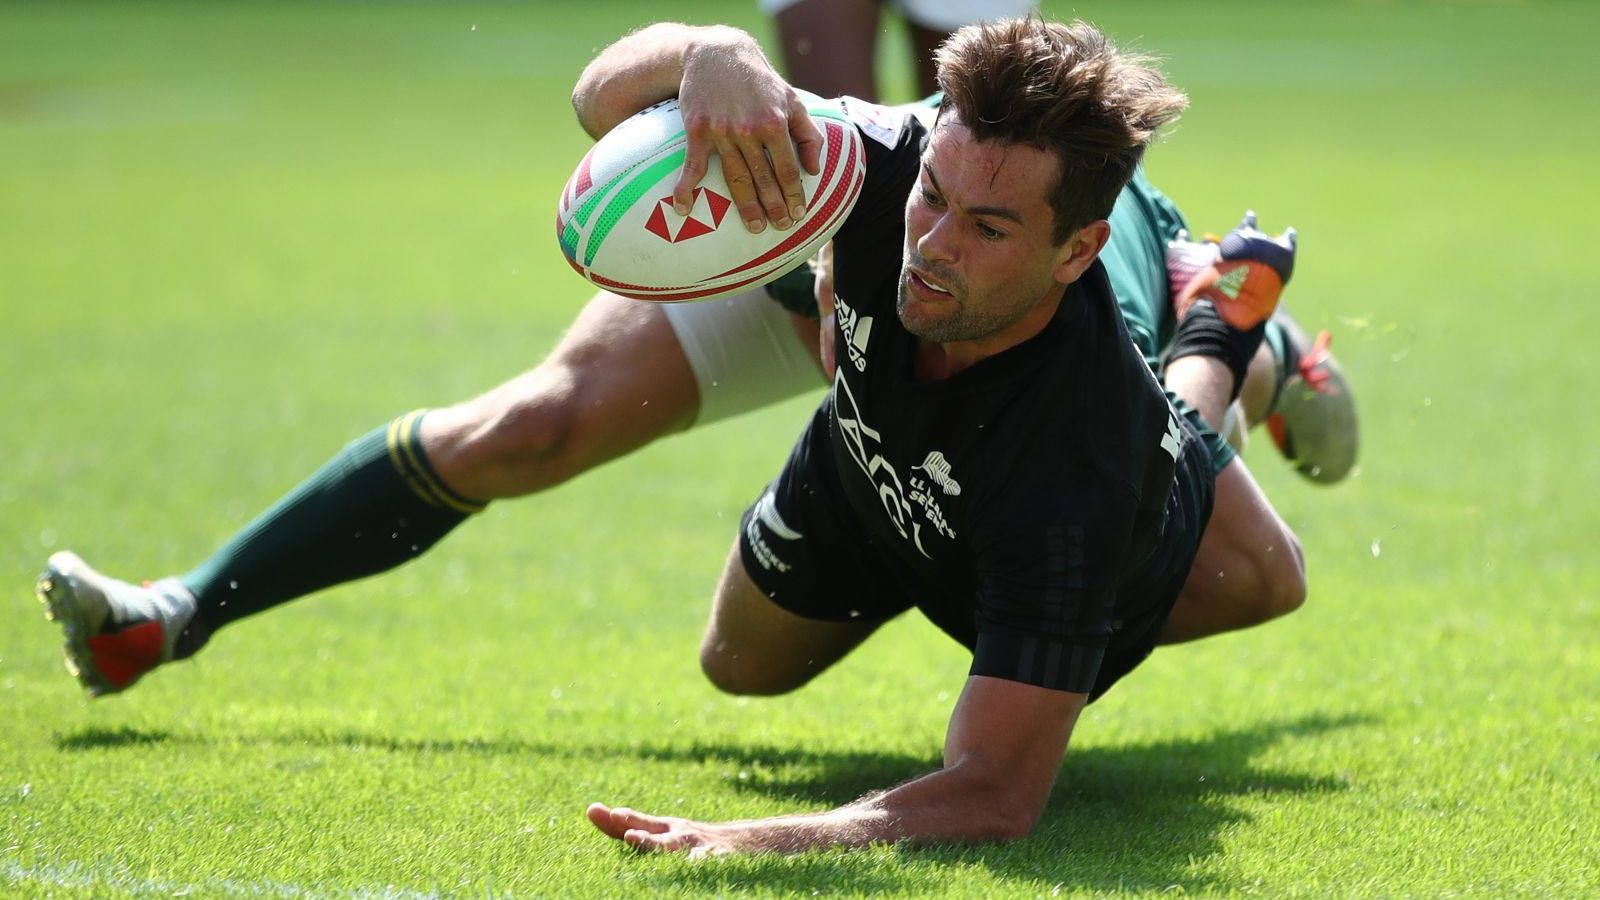 Watch 'HSBC World Rugby Sevens Series' Online Live Stream Anywhere